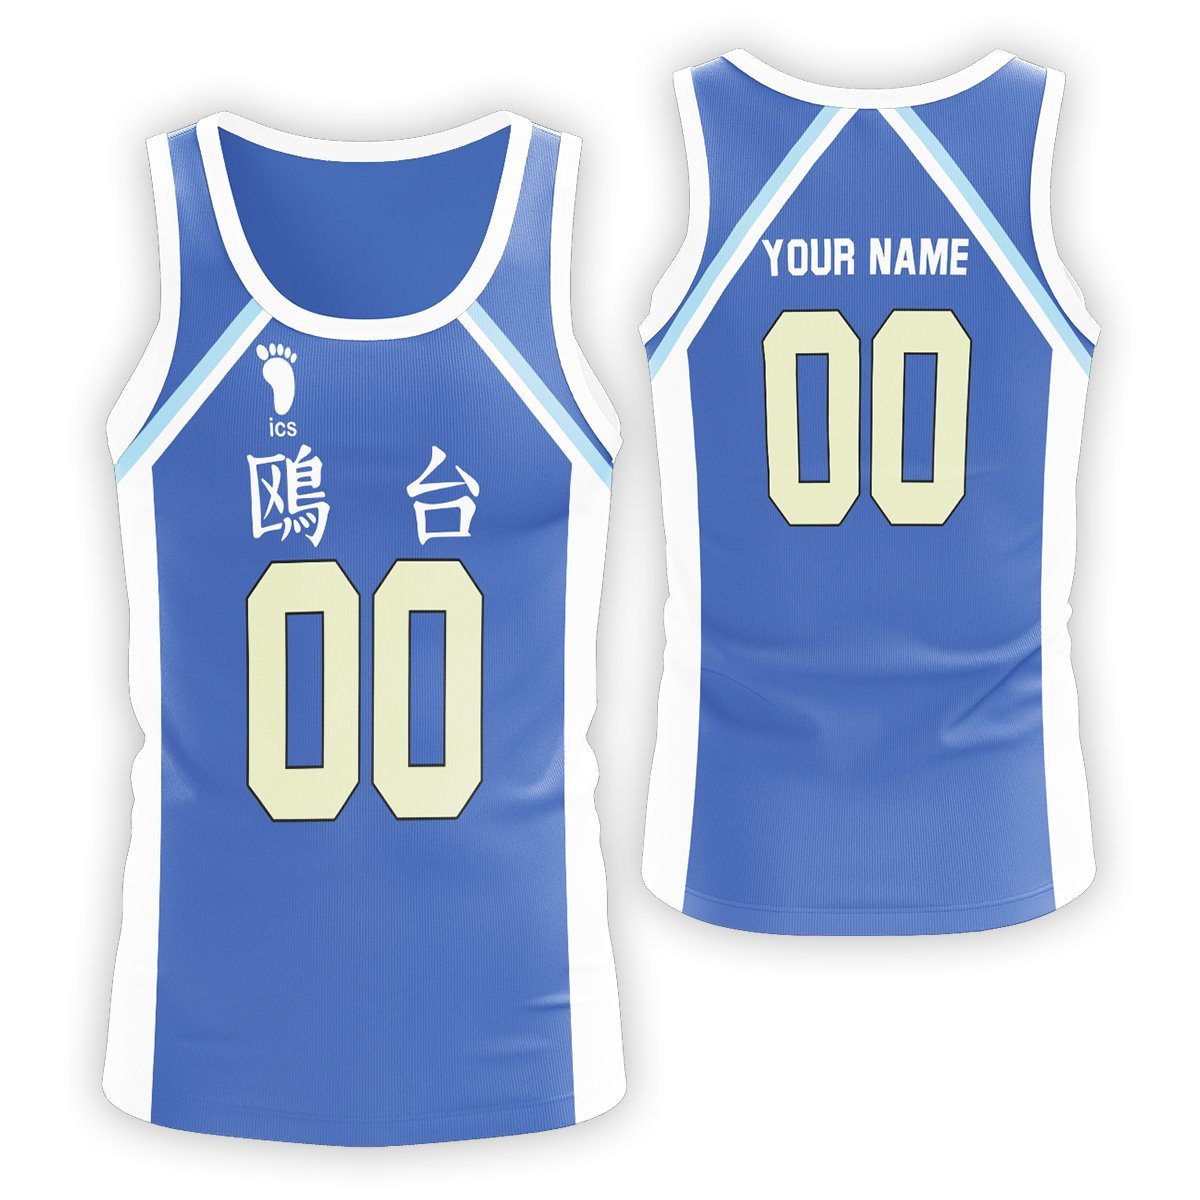 Personalized Kamomedai Libero Unisex Tank Tops FDM3107 S Official Anime Swimsuit Merch